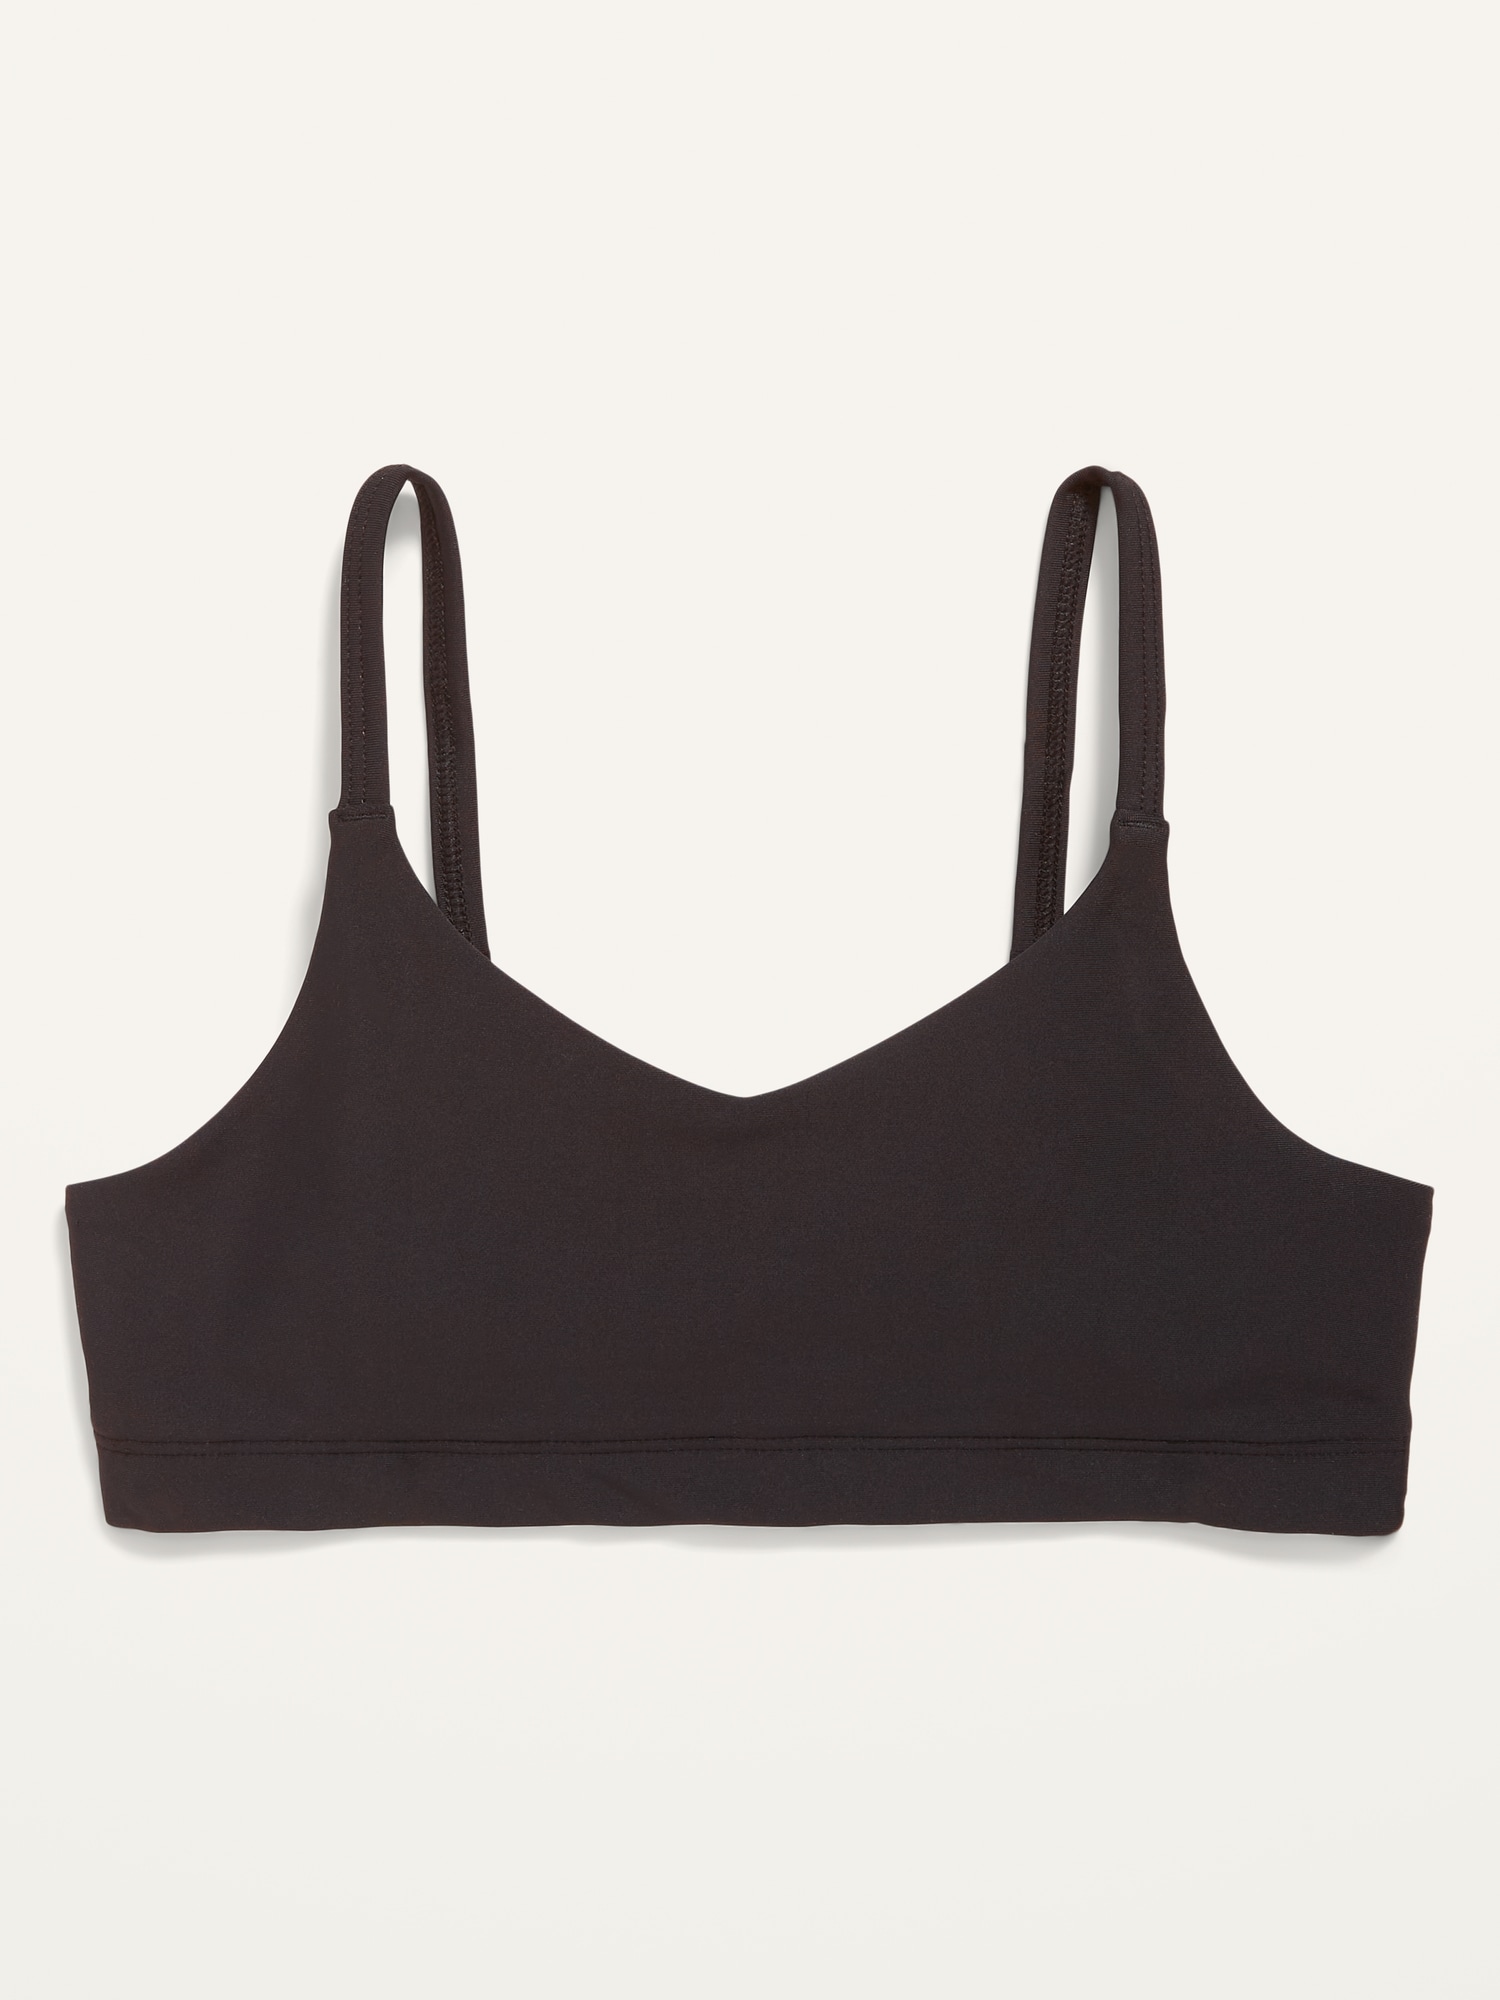 Old Navy PowerSoft Everyday Convertible-Strap Bra for Girls black. 1